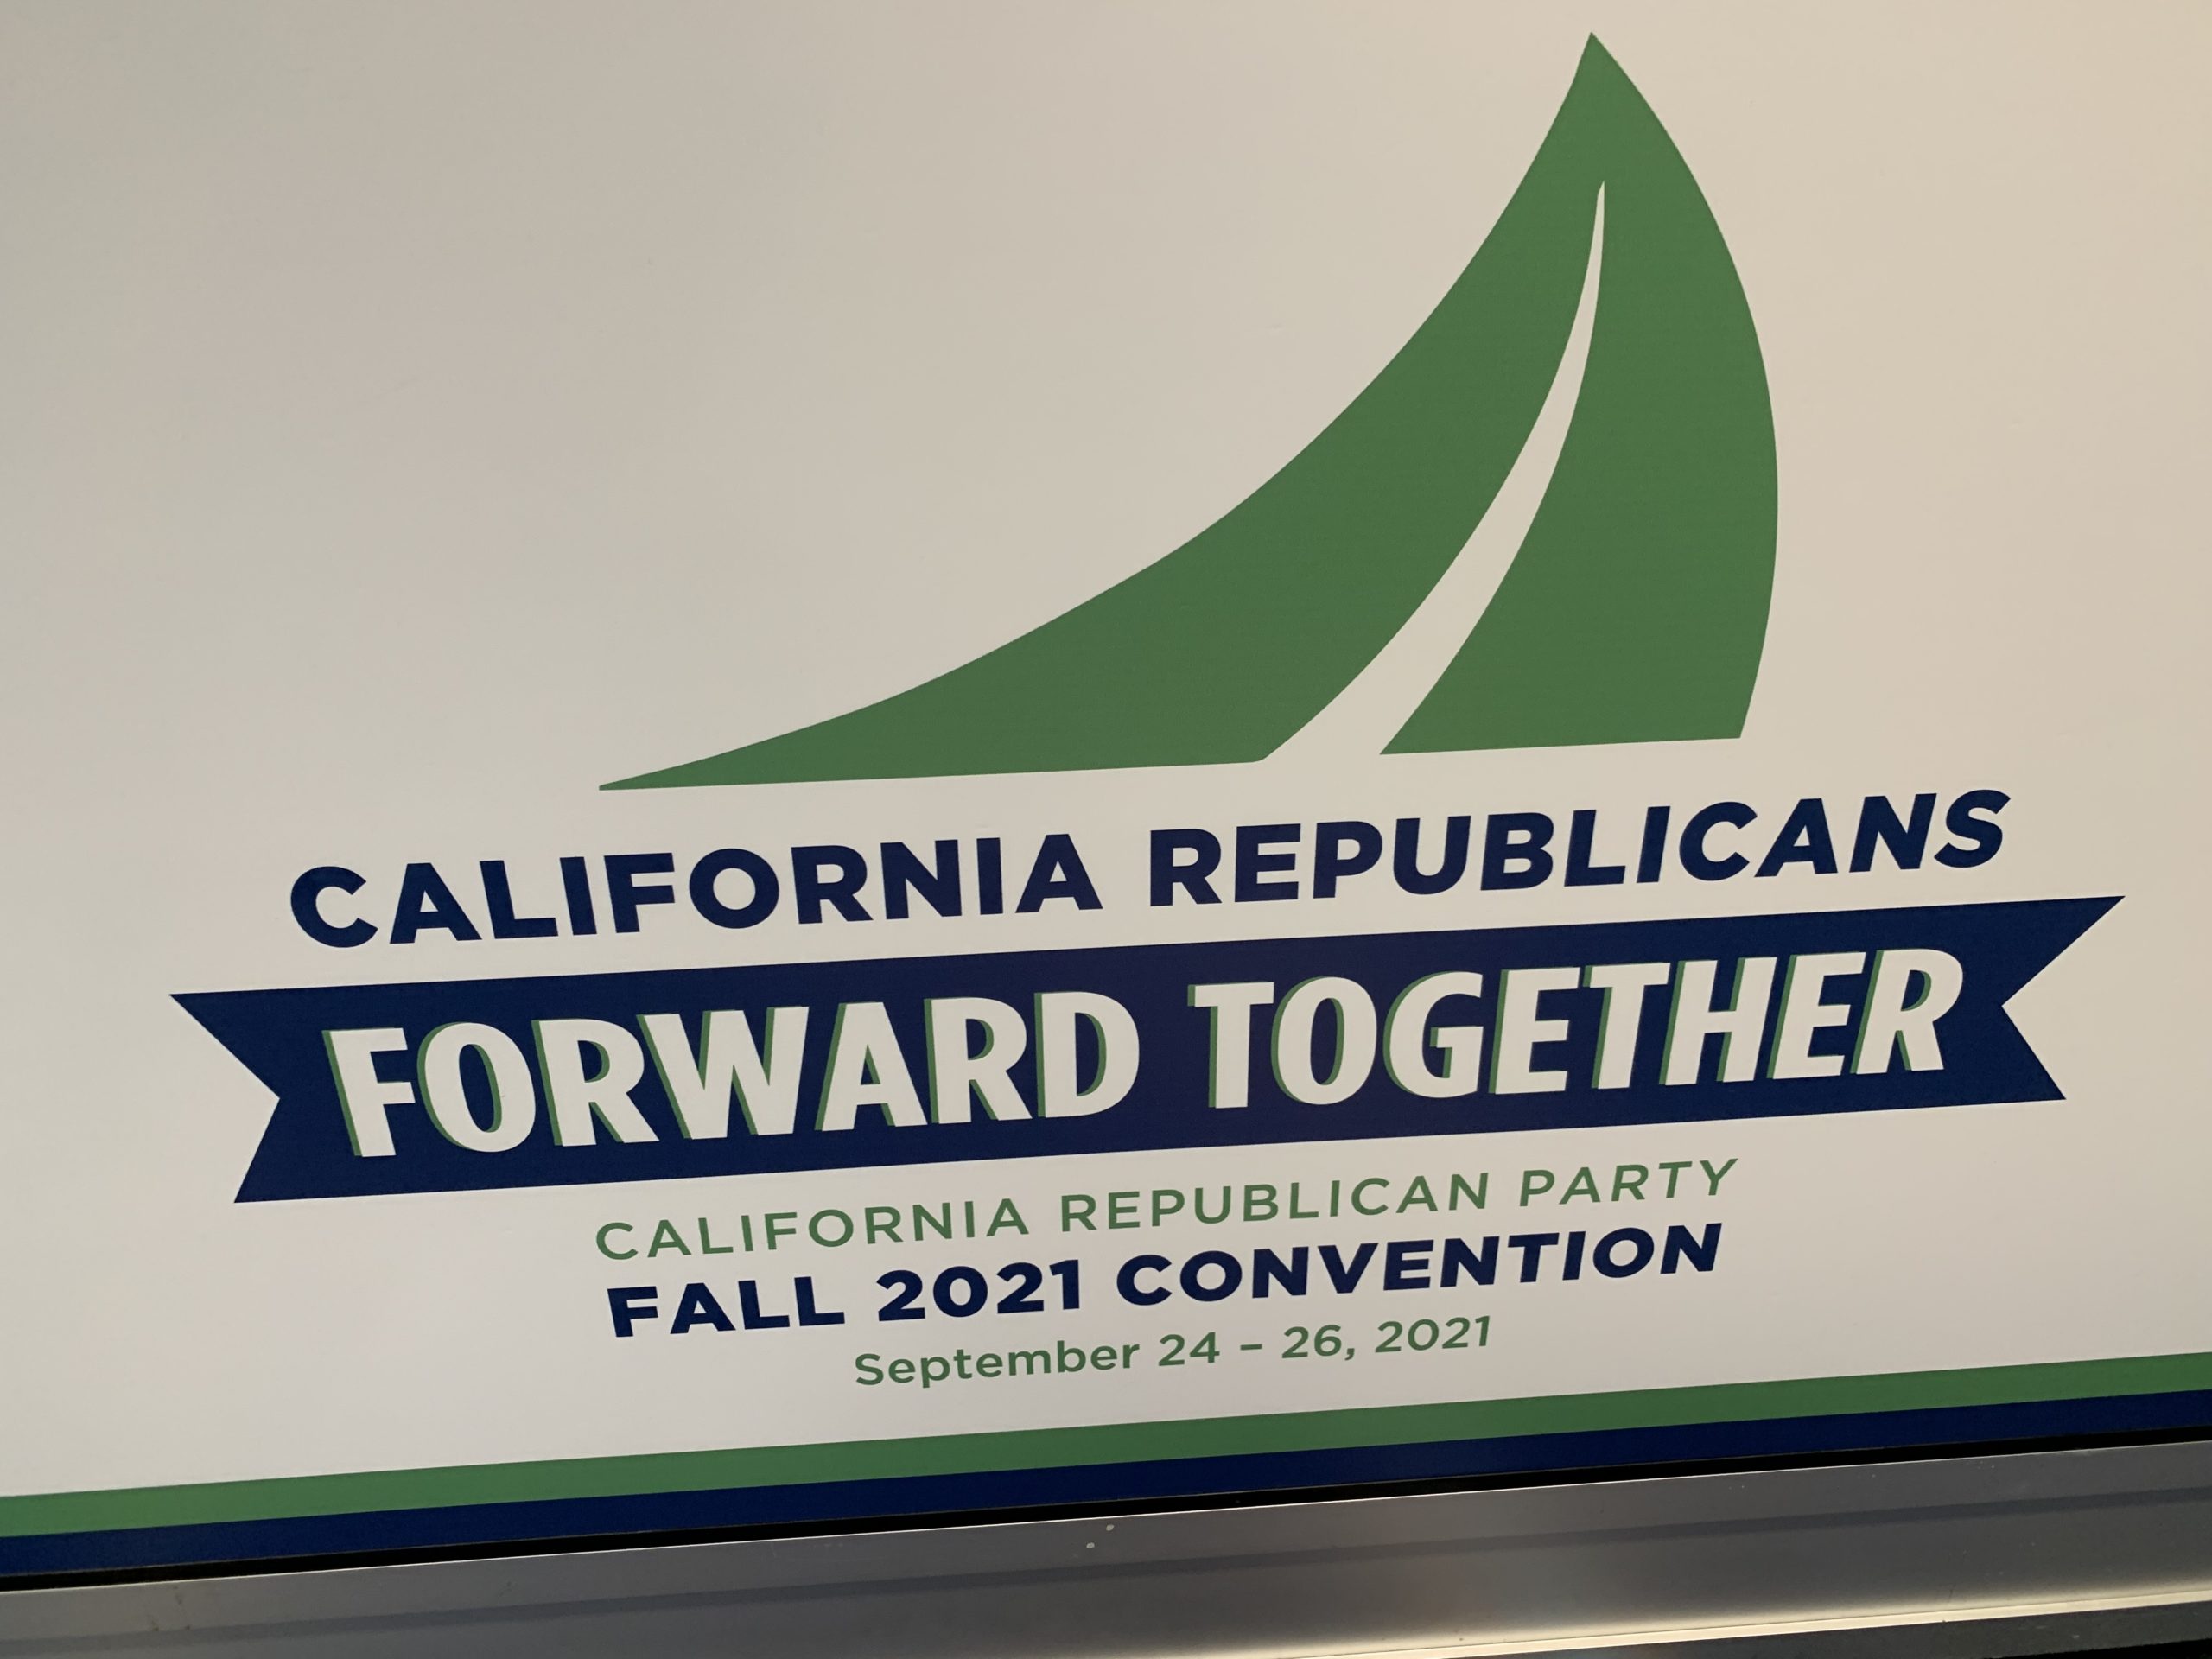 California “Green Republicans” network at conventions